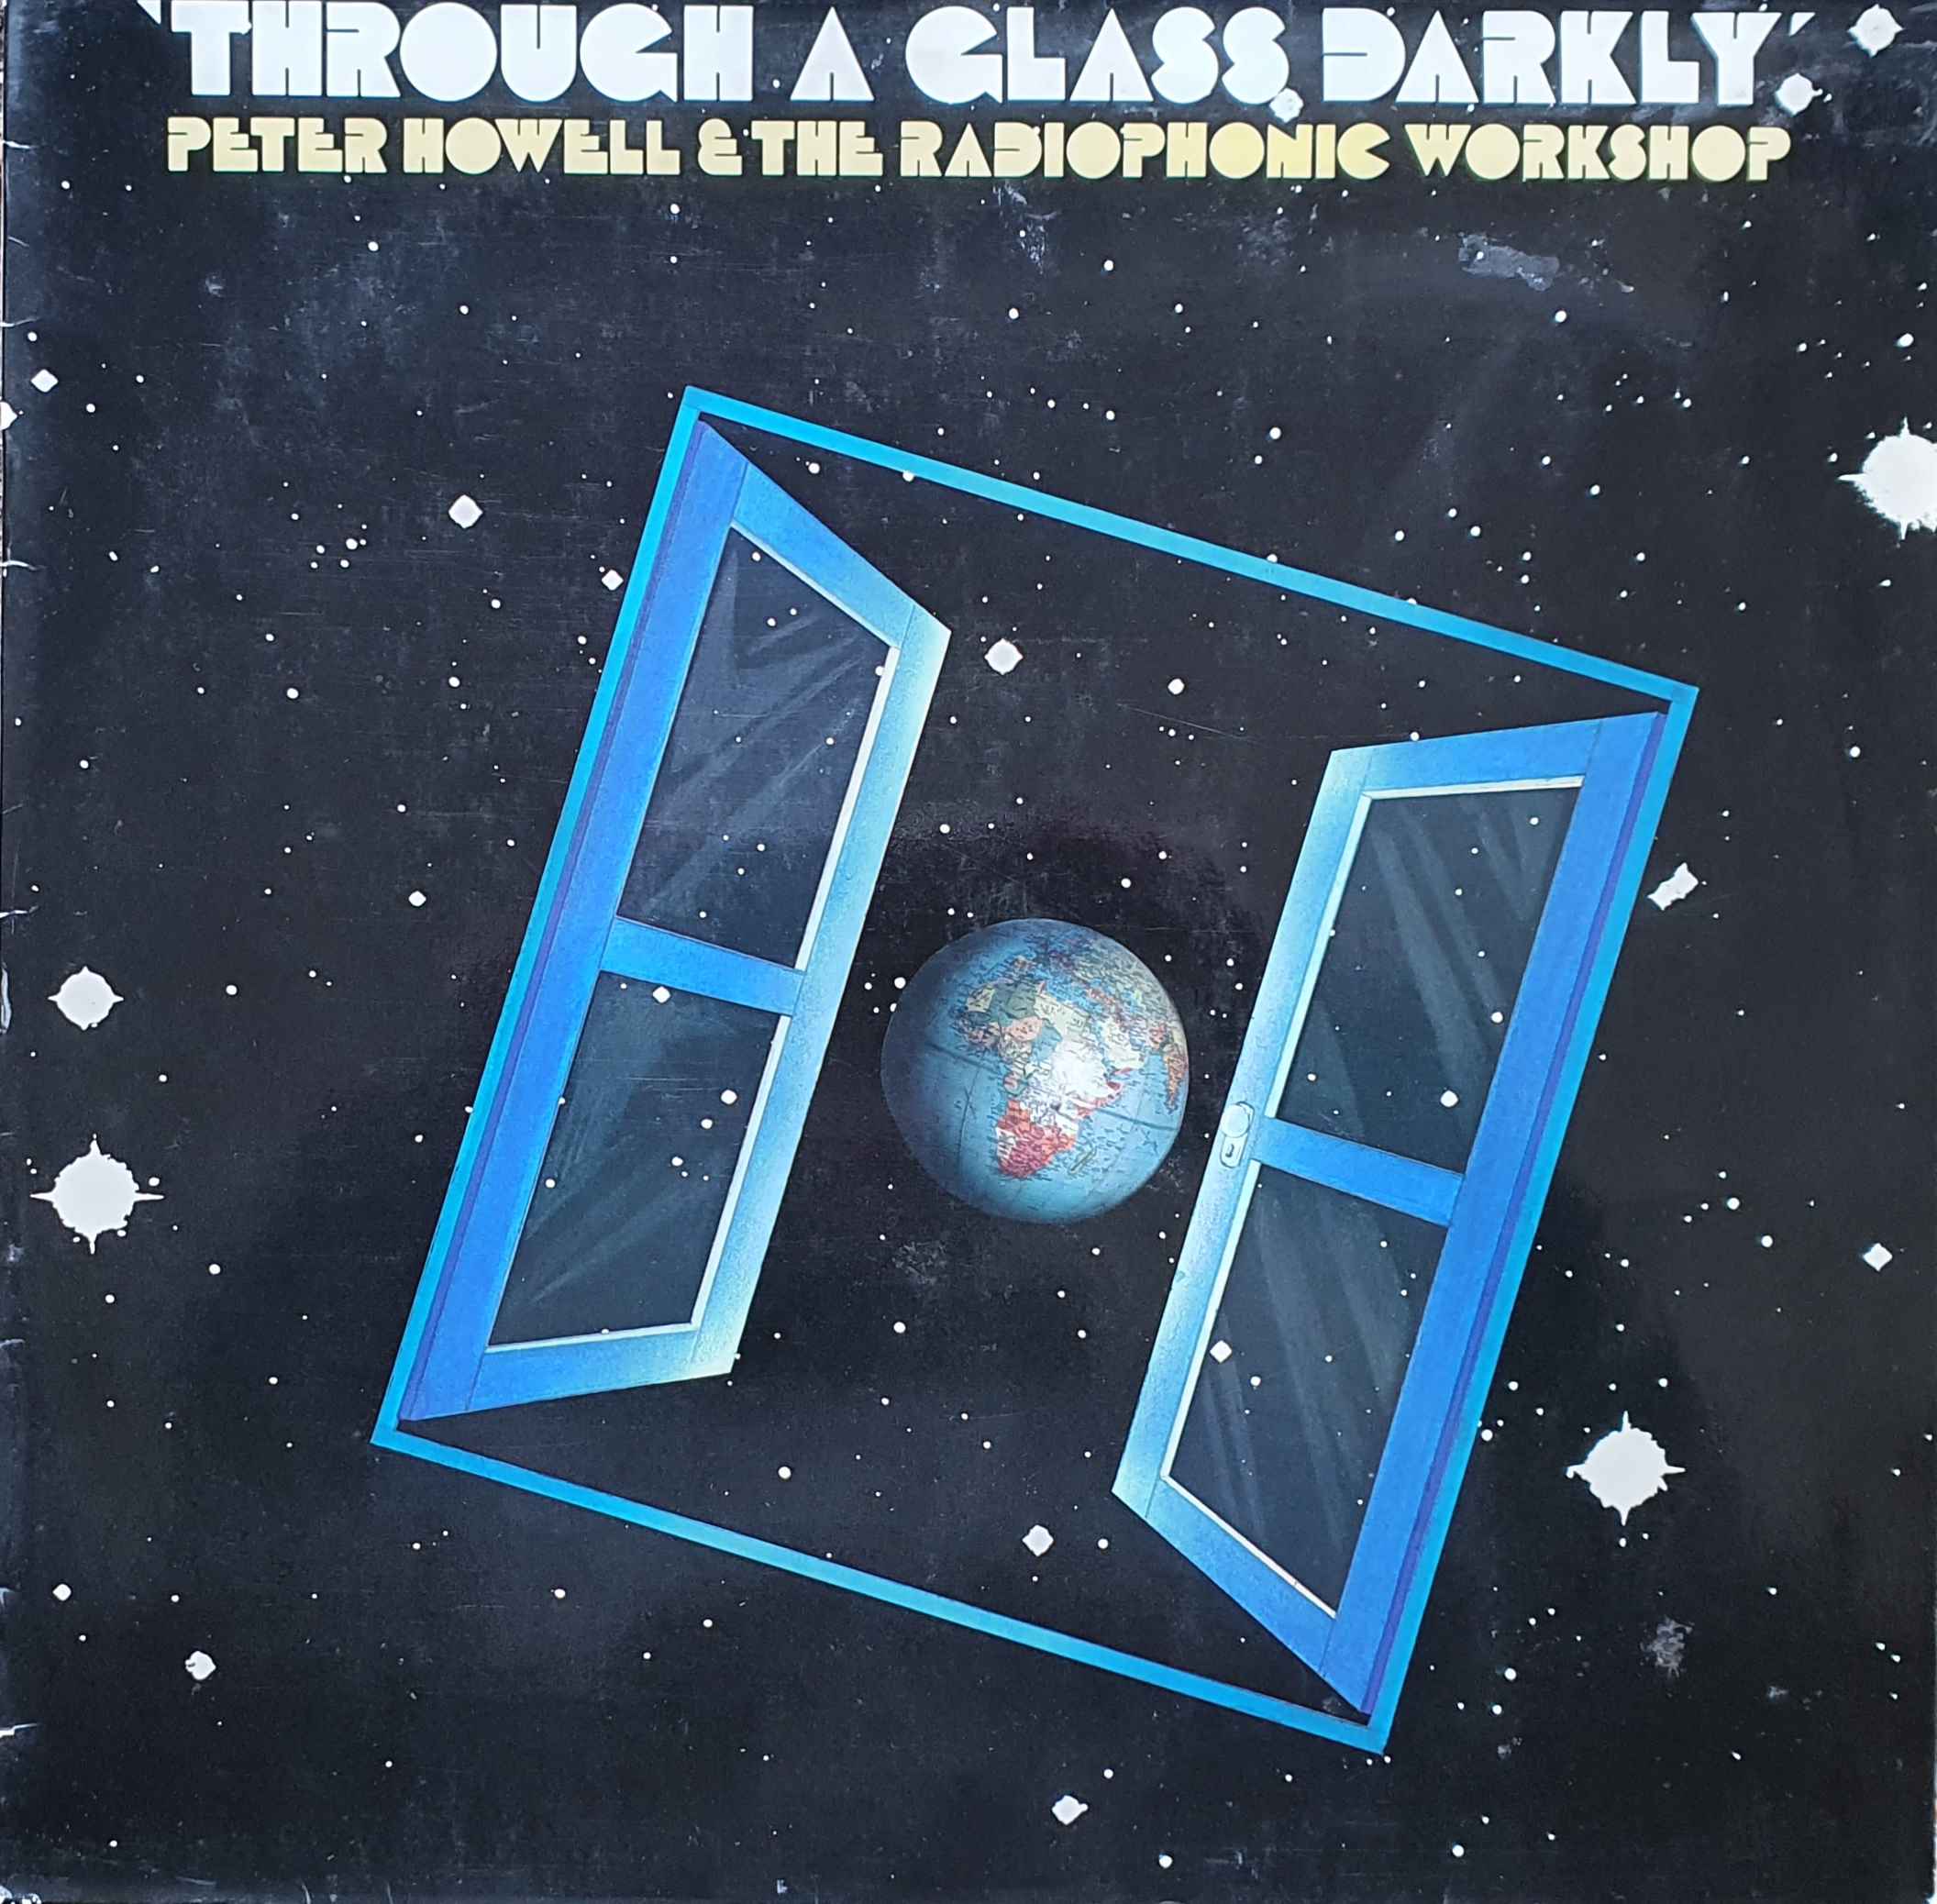 Picture of Through a glass darkly by artist Peter Howell and the Radiophonic Workshop from the BBC albums - Records and Tapes library